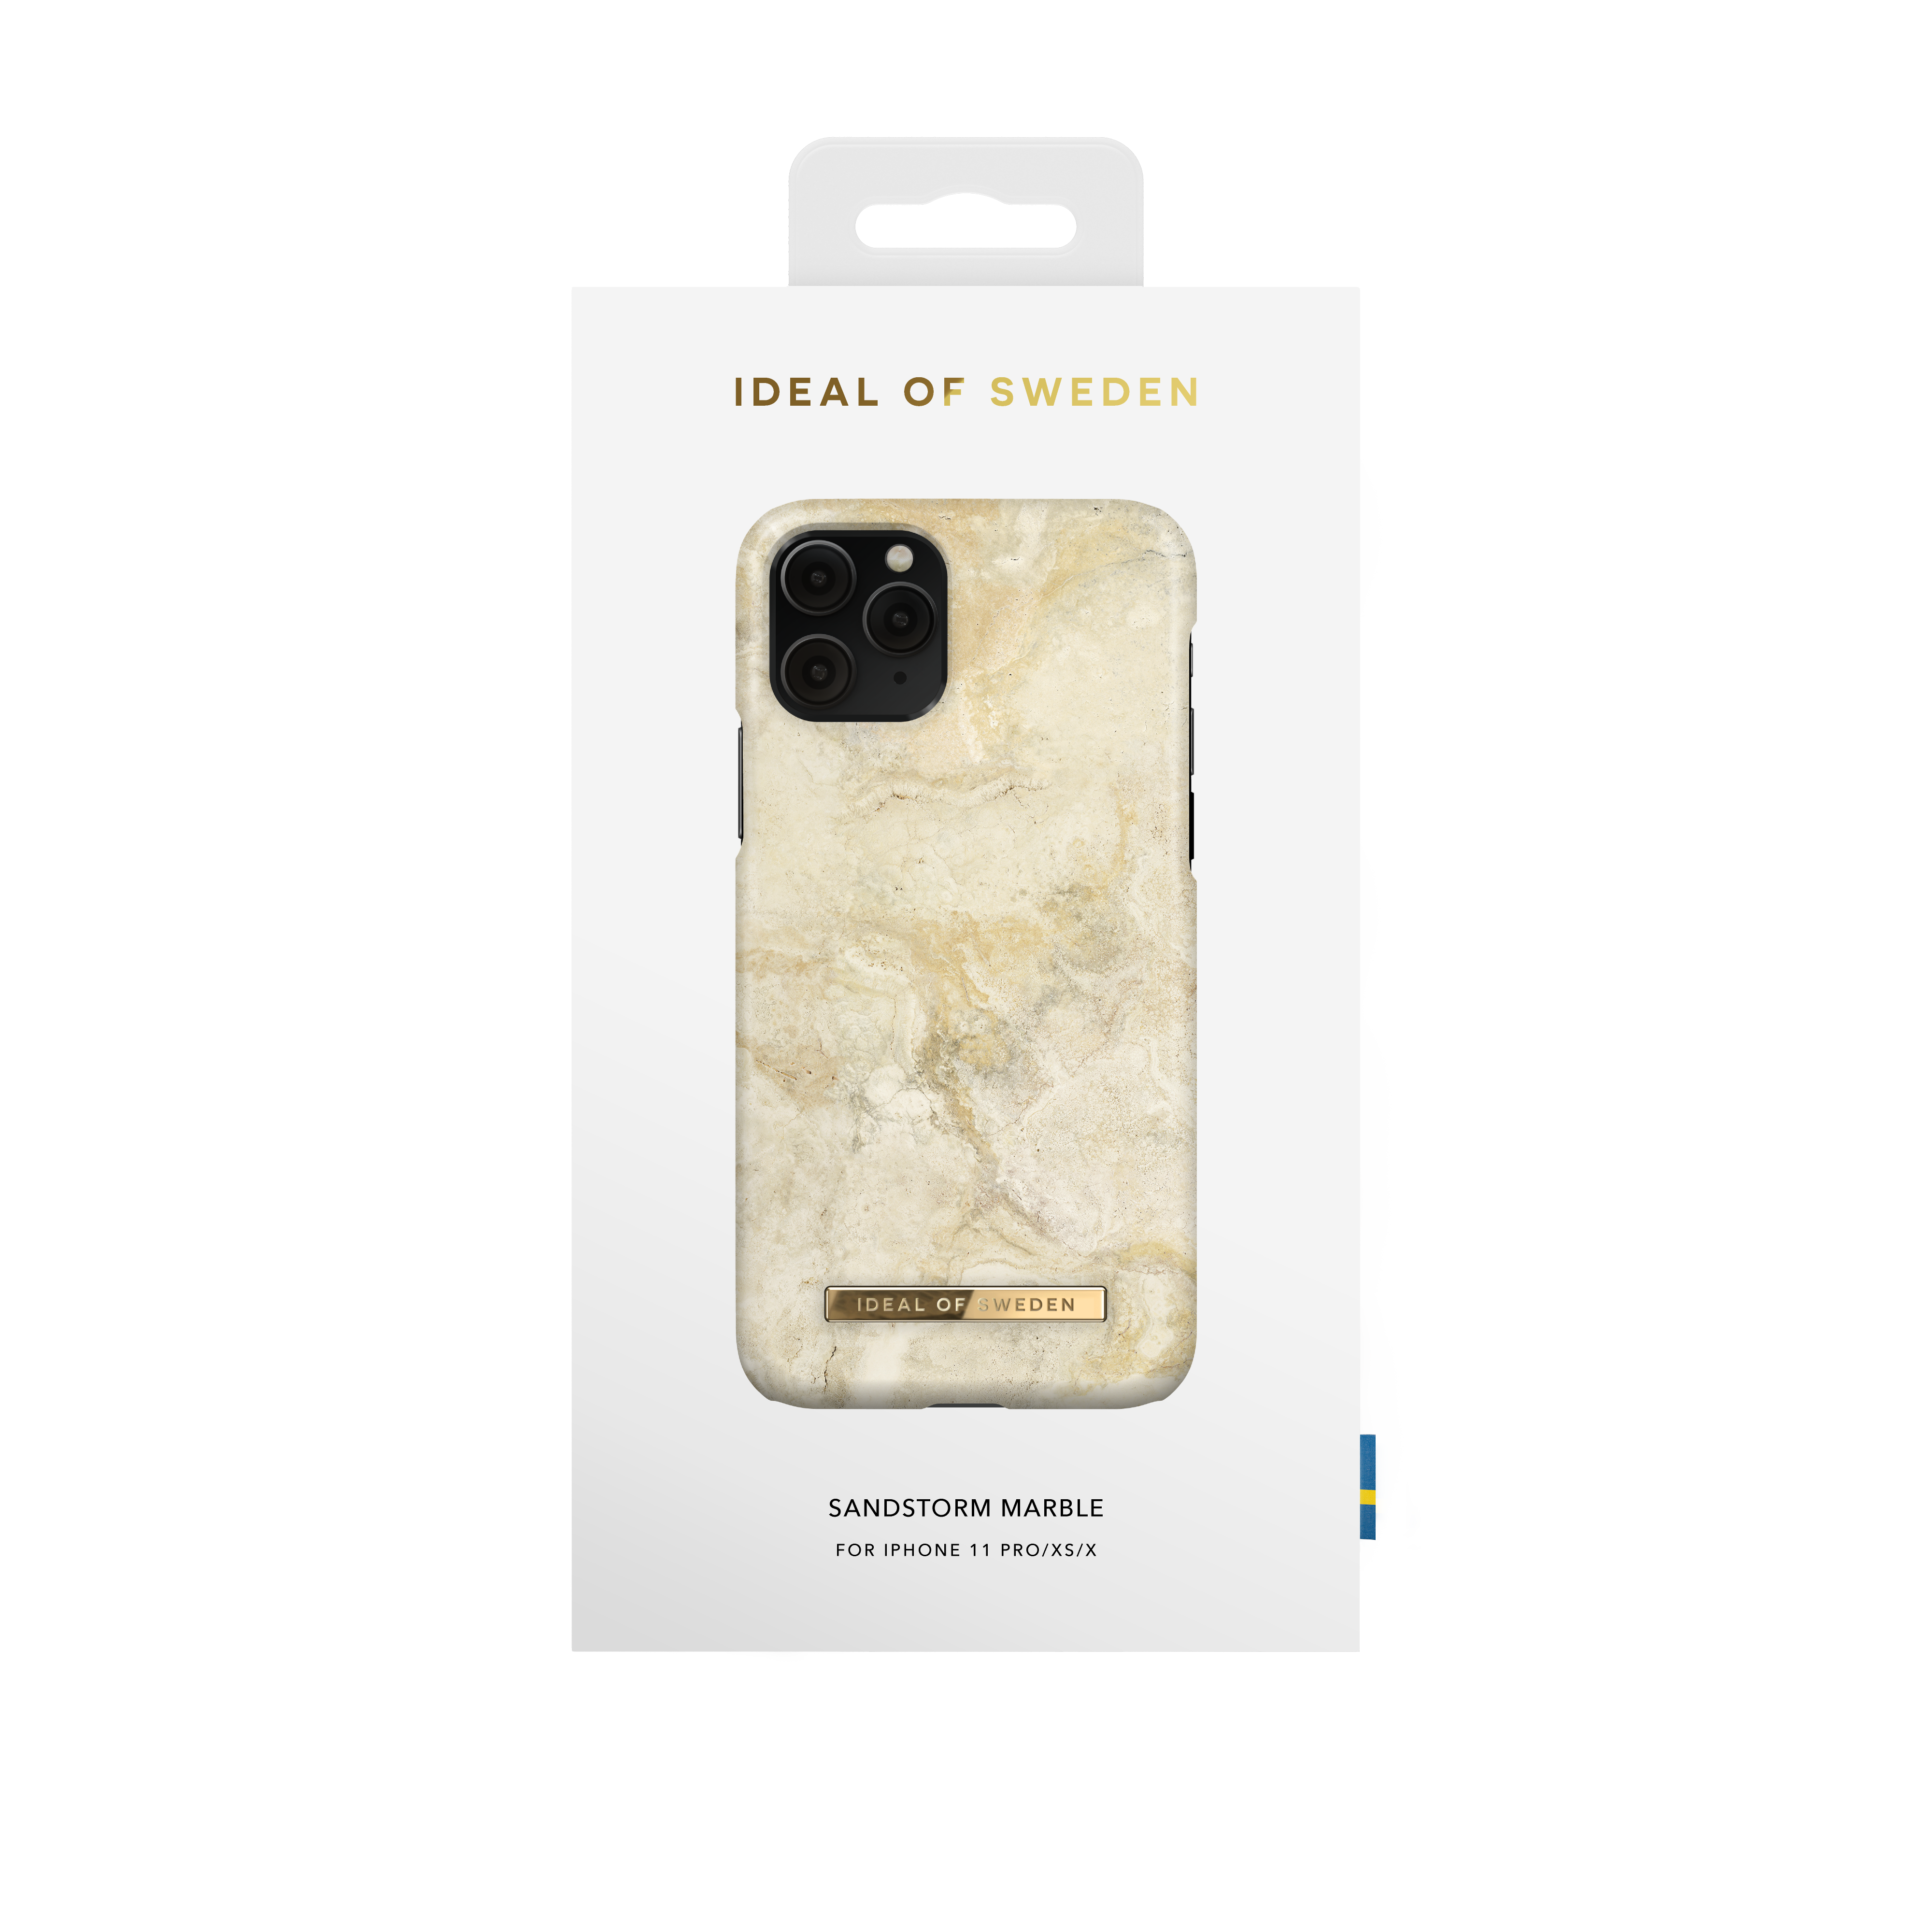 IDEAL iPhone Marble iPhone Pro, Backcover, OF iPhone SWEDEN Apple, XS, Sandstorm X, IDFCSS20-I1958-195, 11